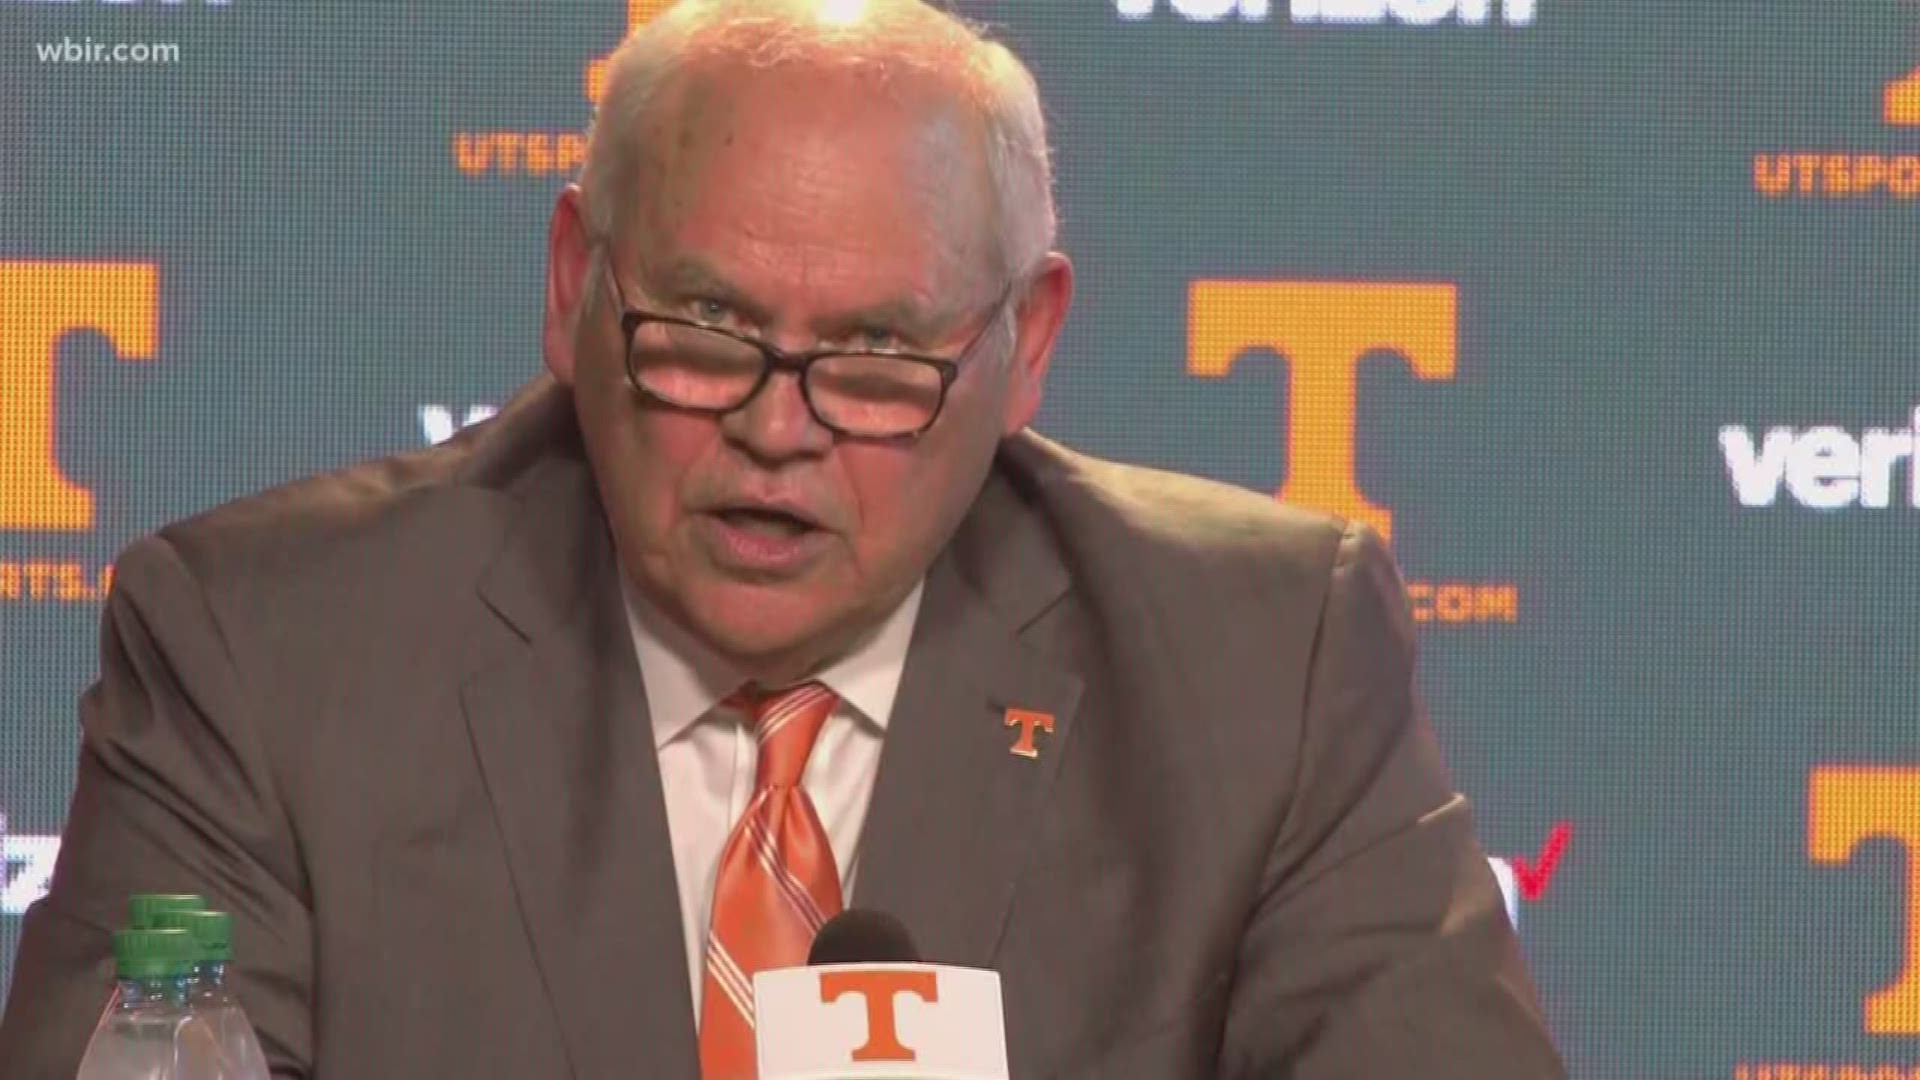 Dec. 1, 2017: UT Athletics Director John Currie is on leave with pay, and former head football coach Phillip Fulmer will step into the role of athletics director.